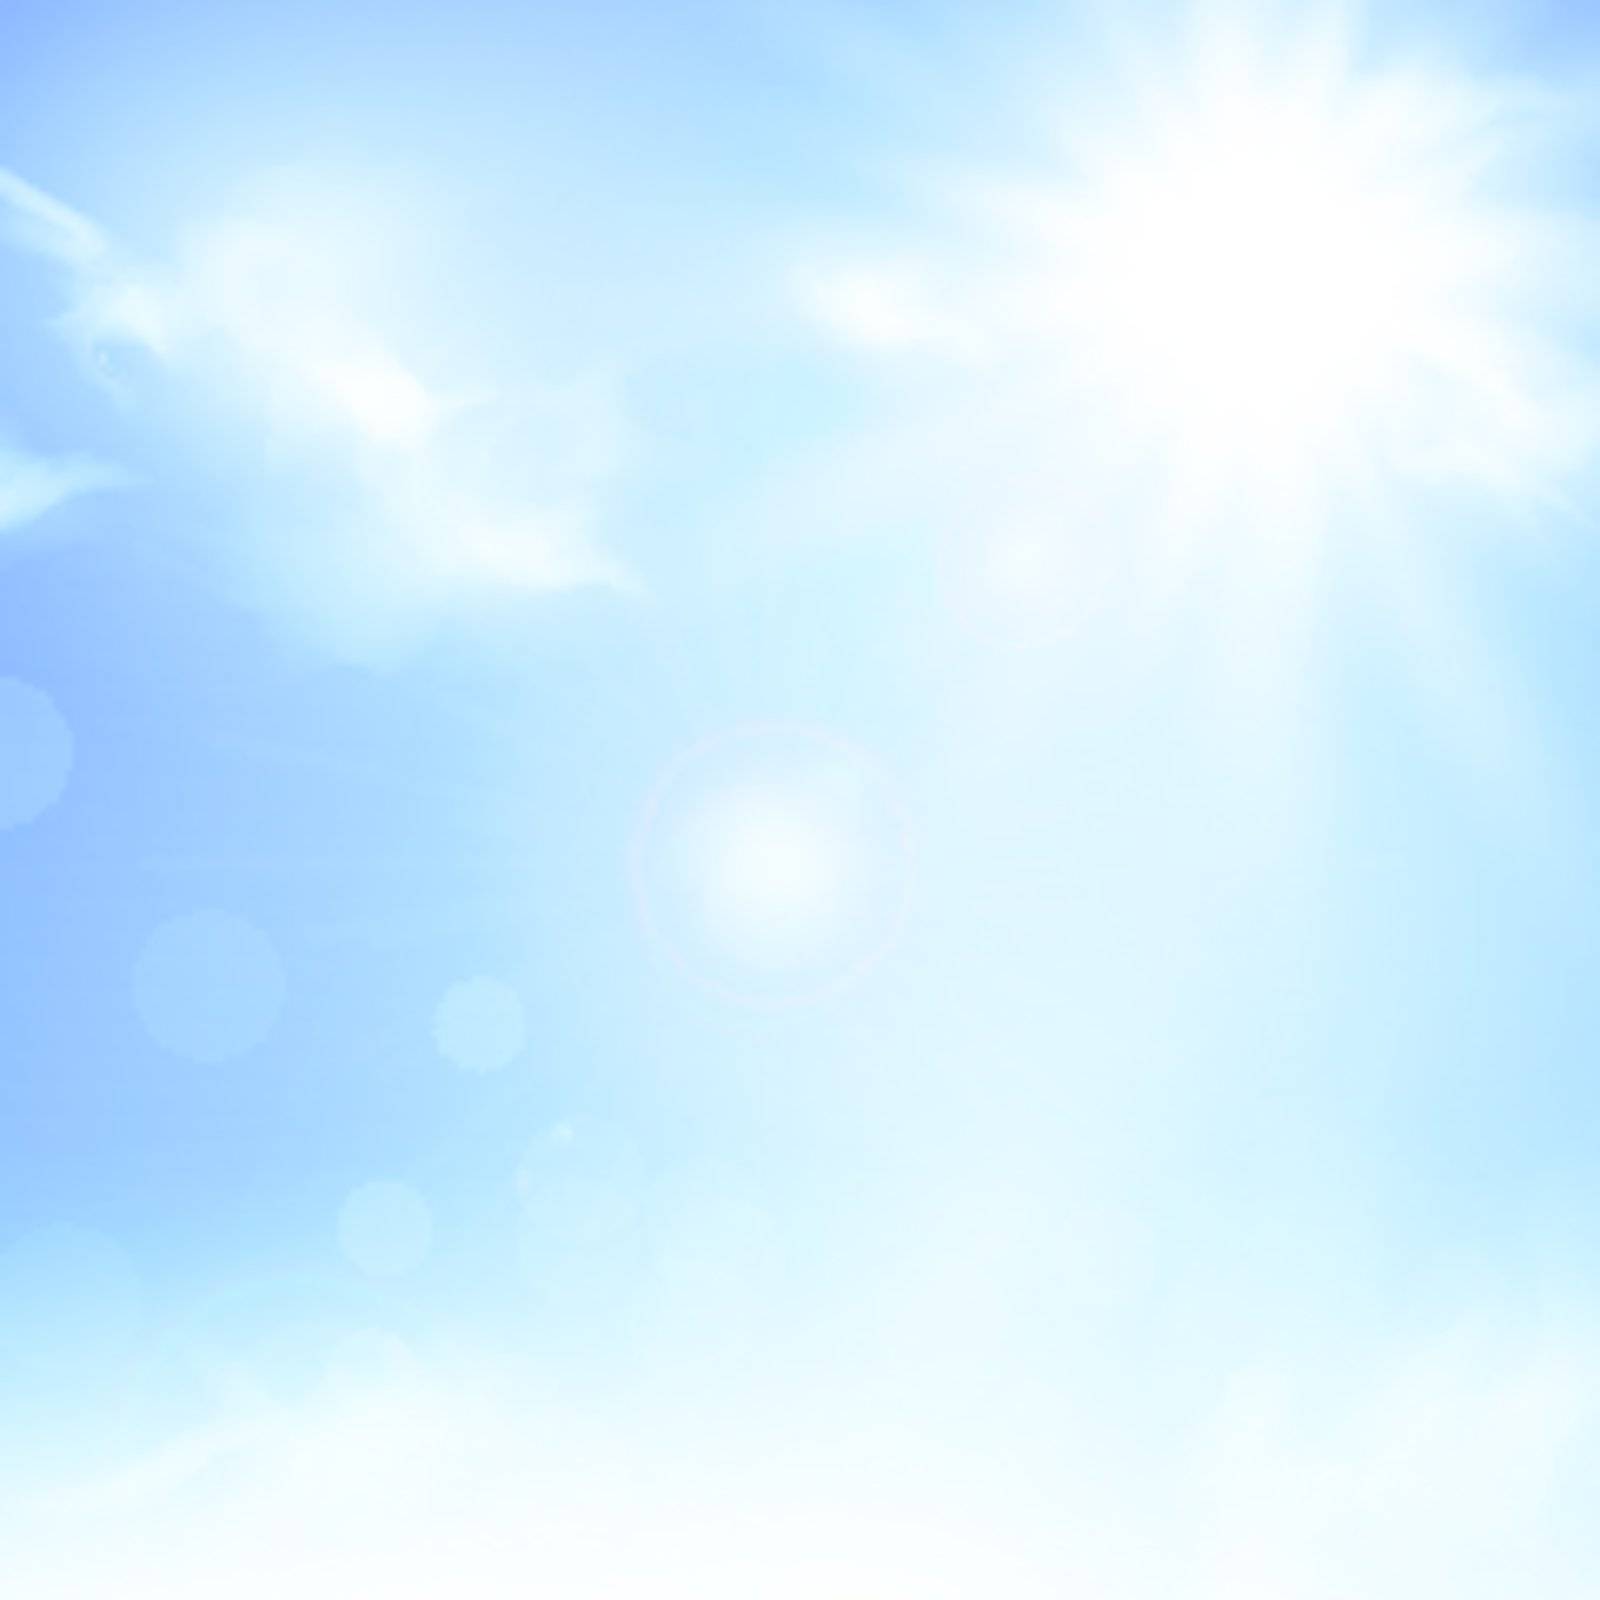 Illustration of the nature background with blue sky and sun 